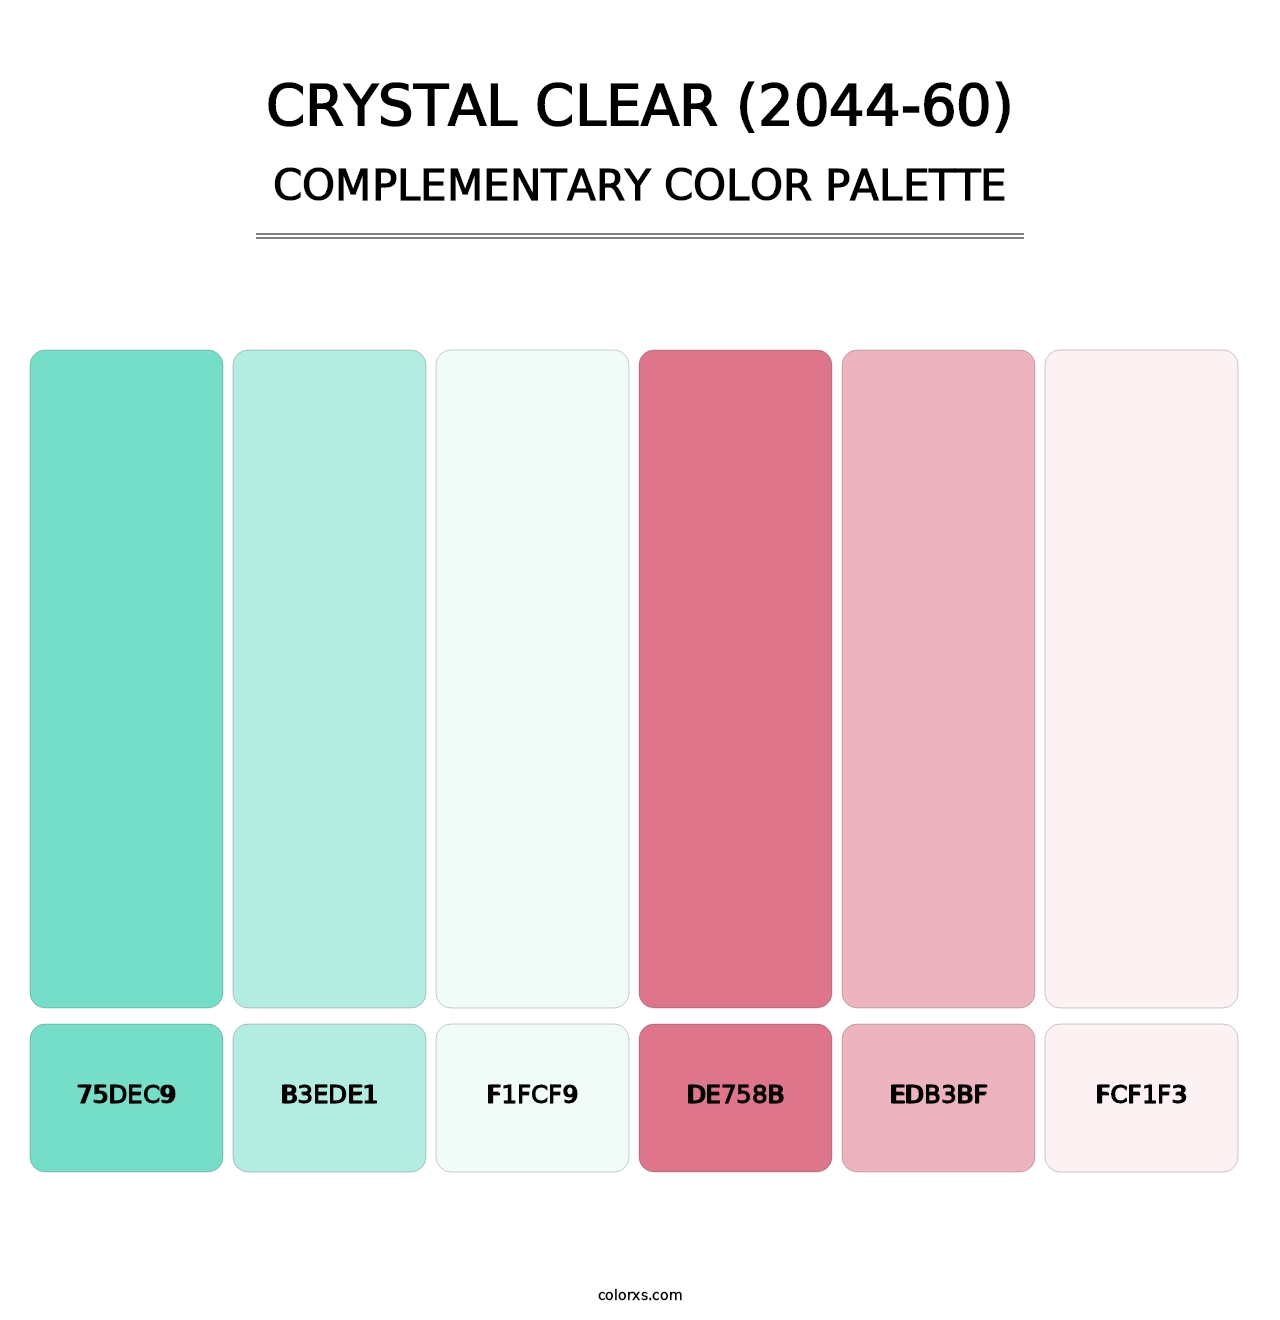 Crystal Clear (2044-60) - Complementary Color Palette